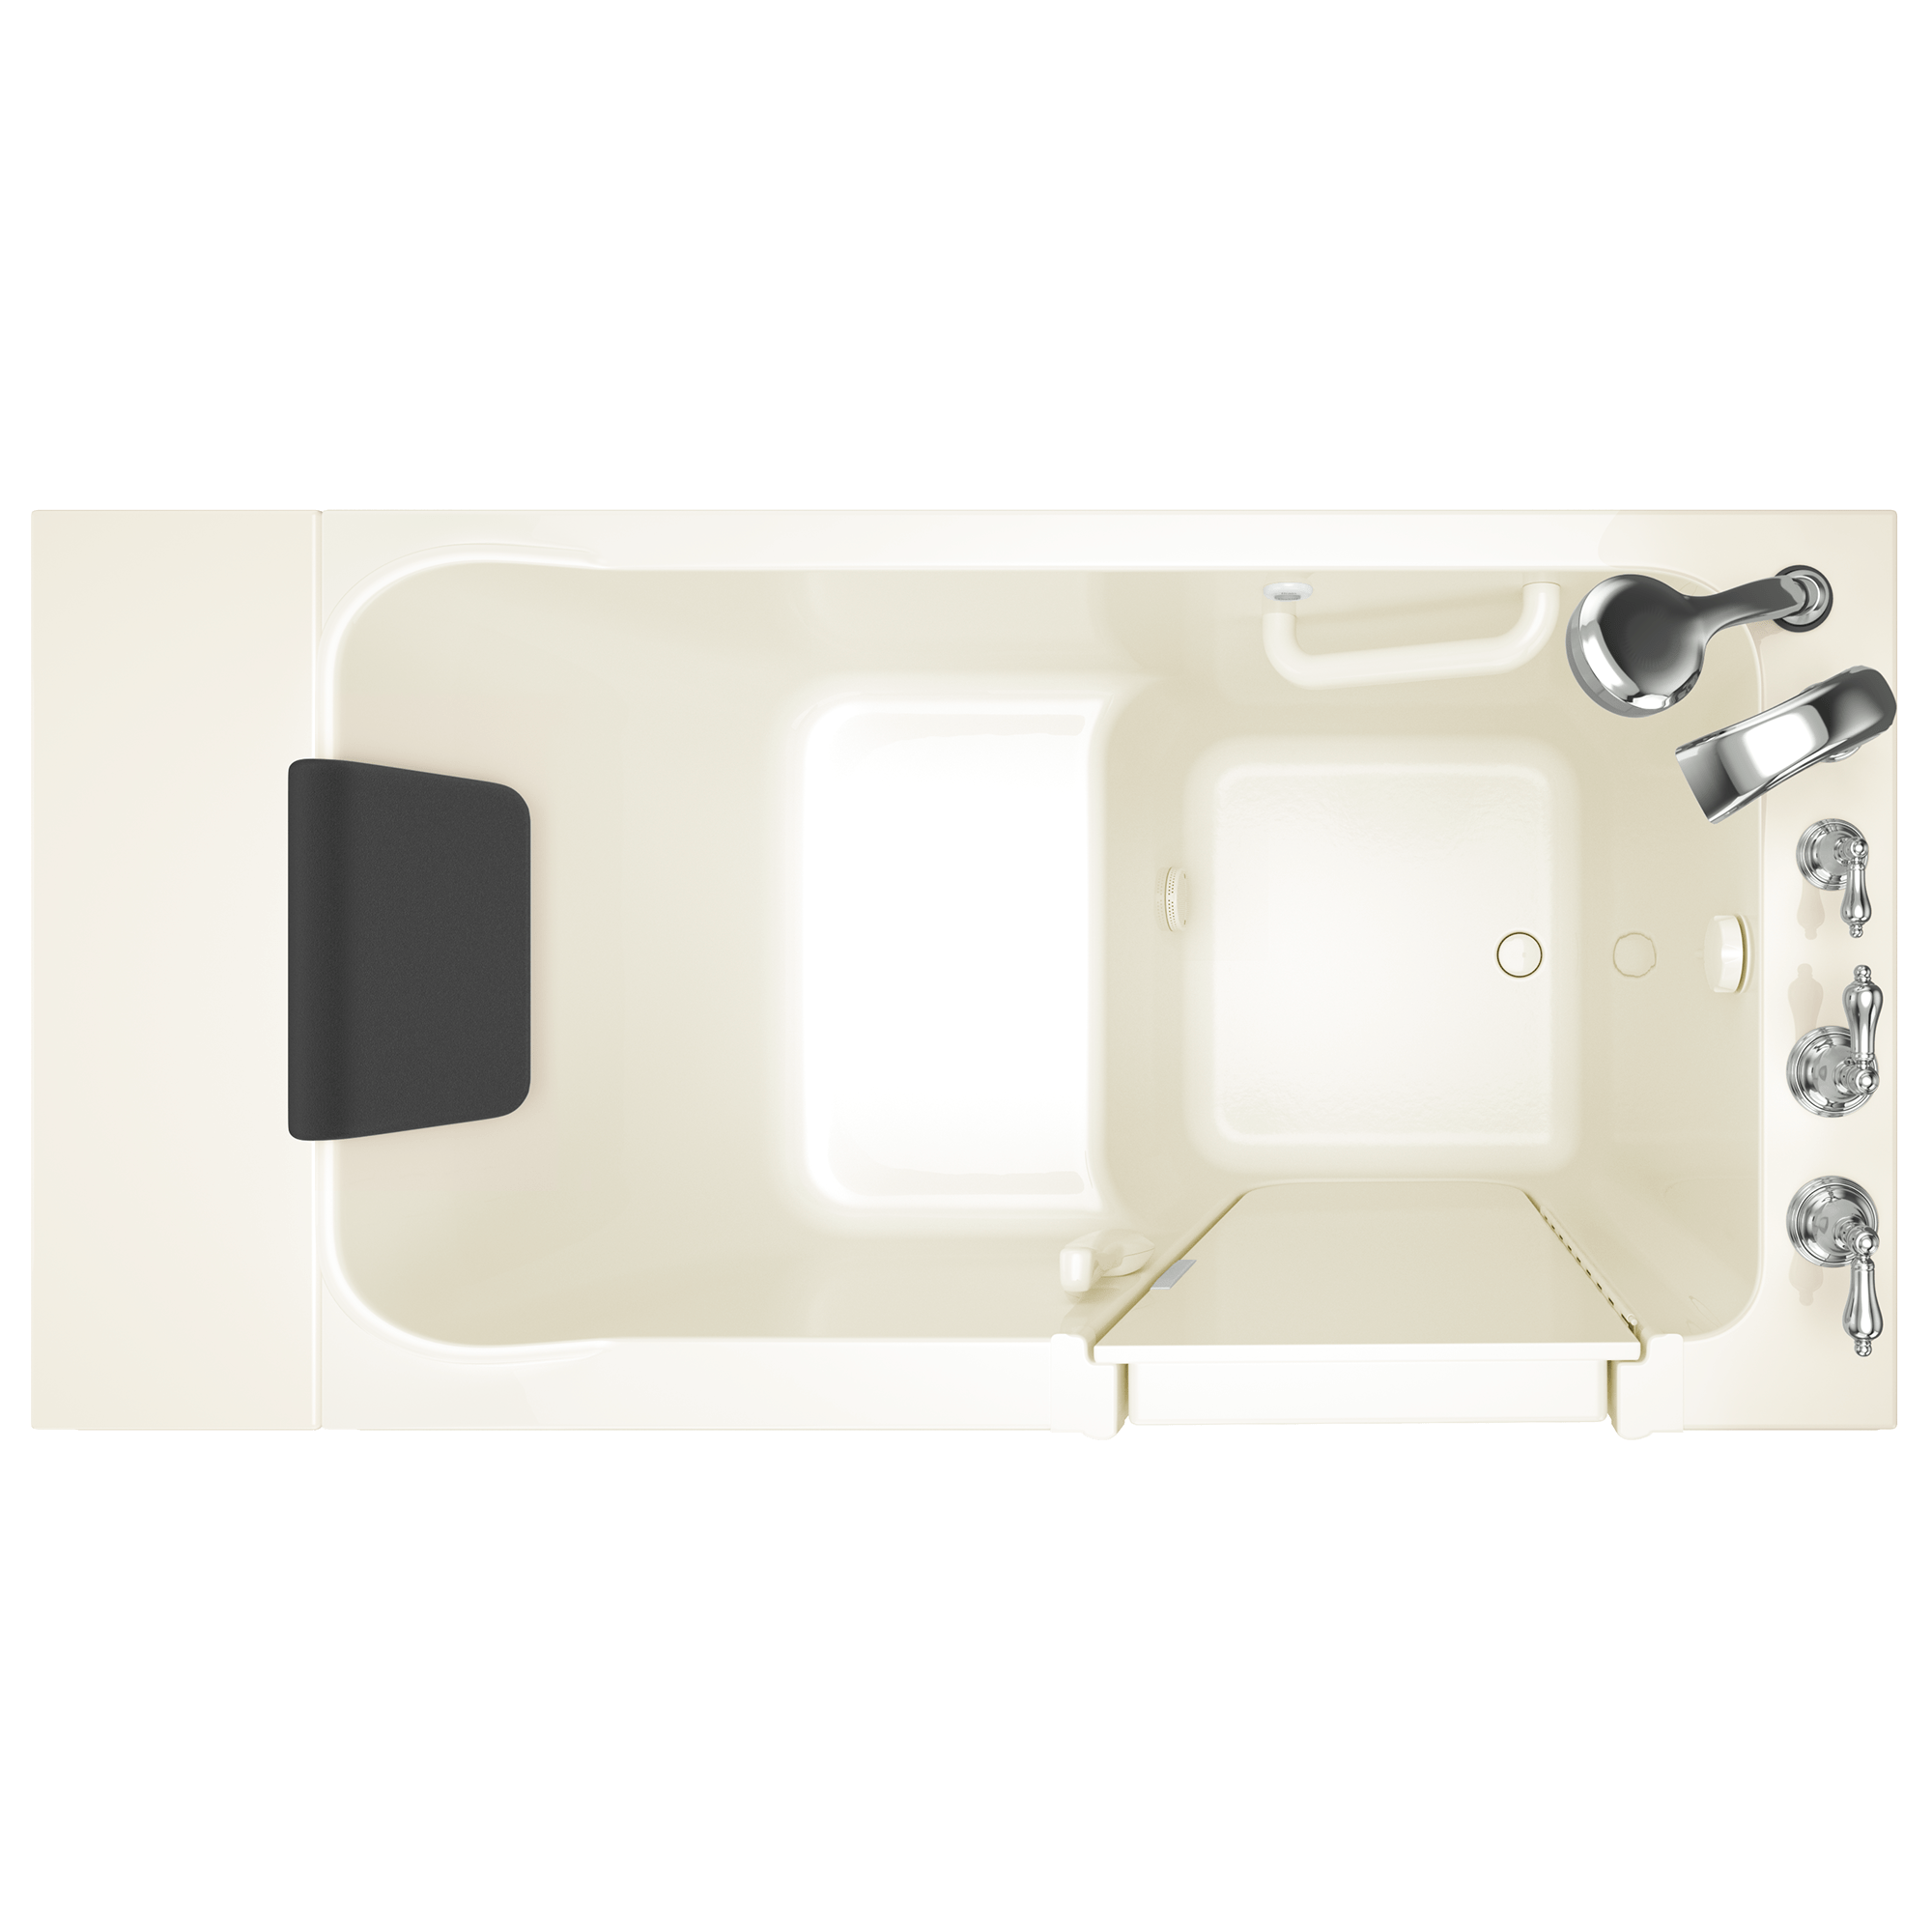 Acrylic Luxury Series 30 x 51  Inch Walk in Tub With Soaker System   Right Hand Drain With Faucet WIB LINEN